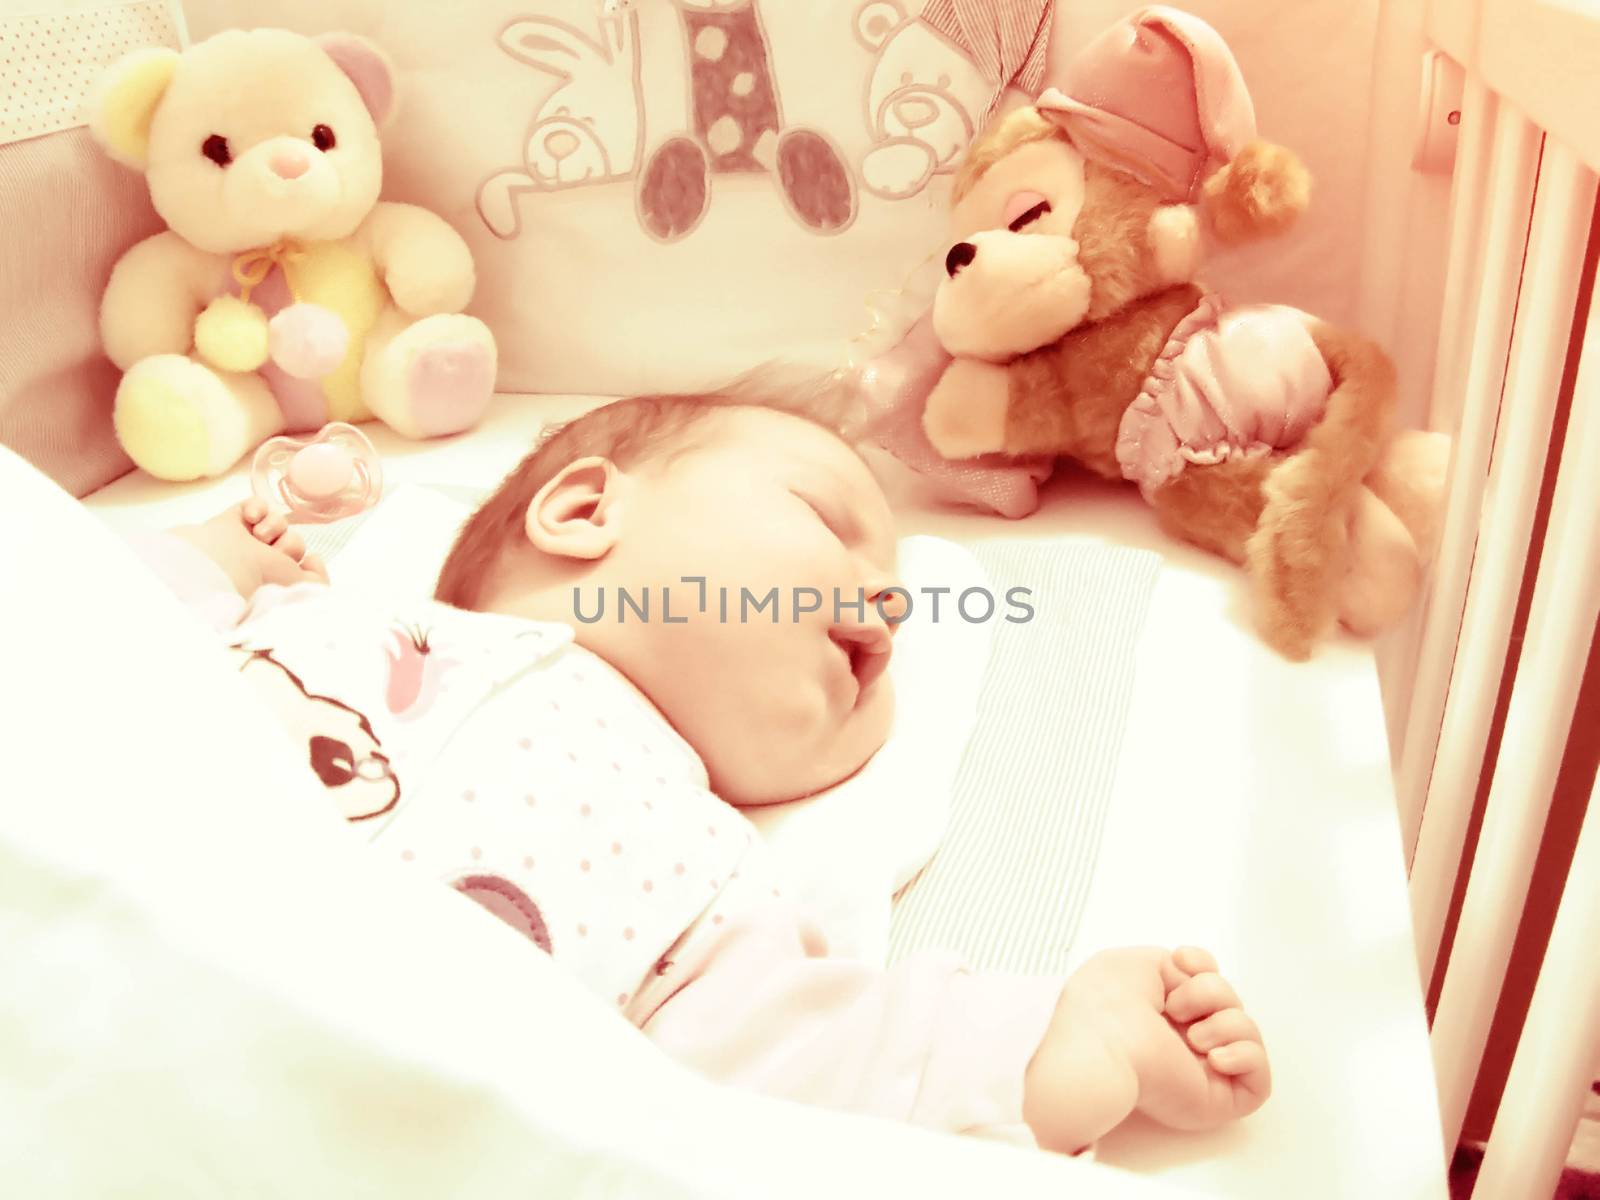 Newborn baby sleeping with toys by fadeinphotography